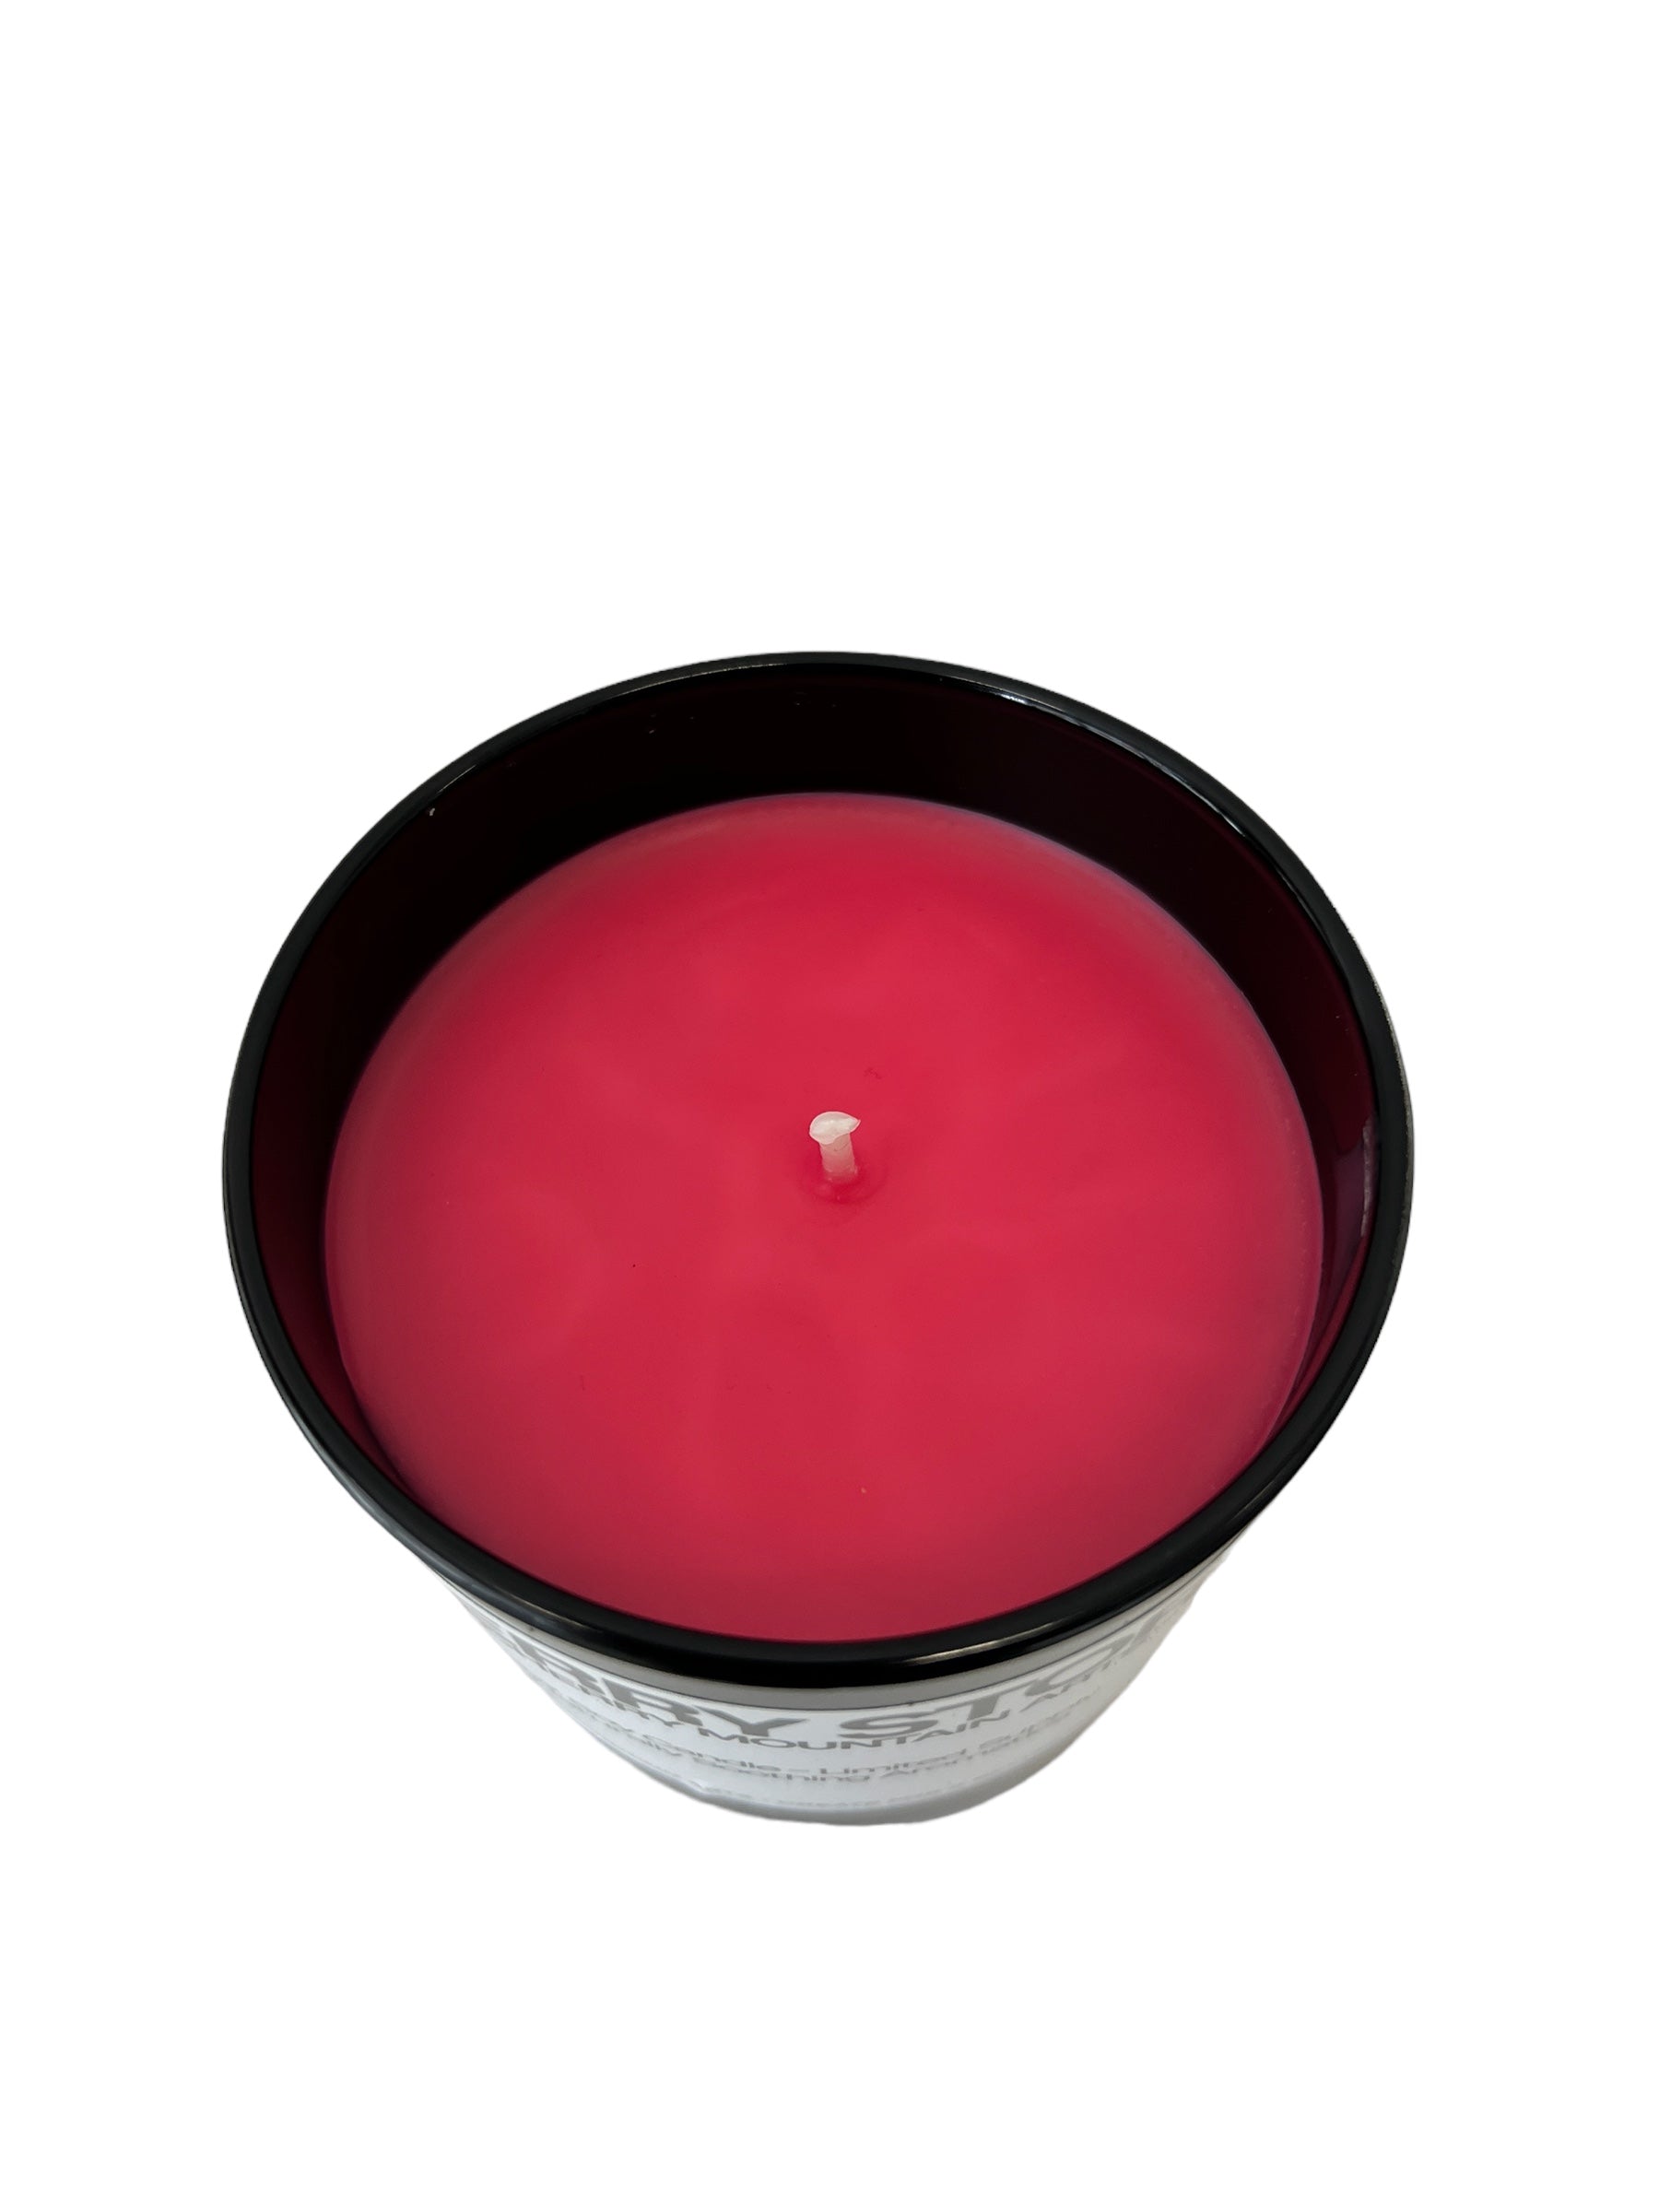 Cherry Storm Candle